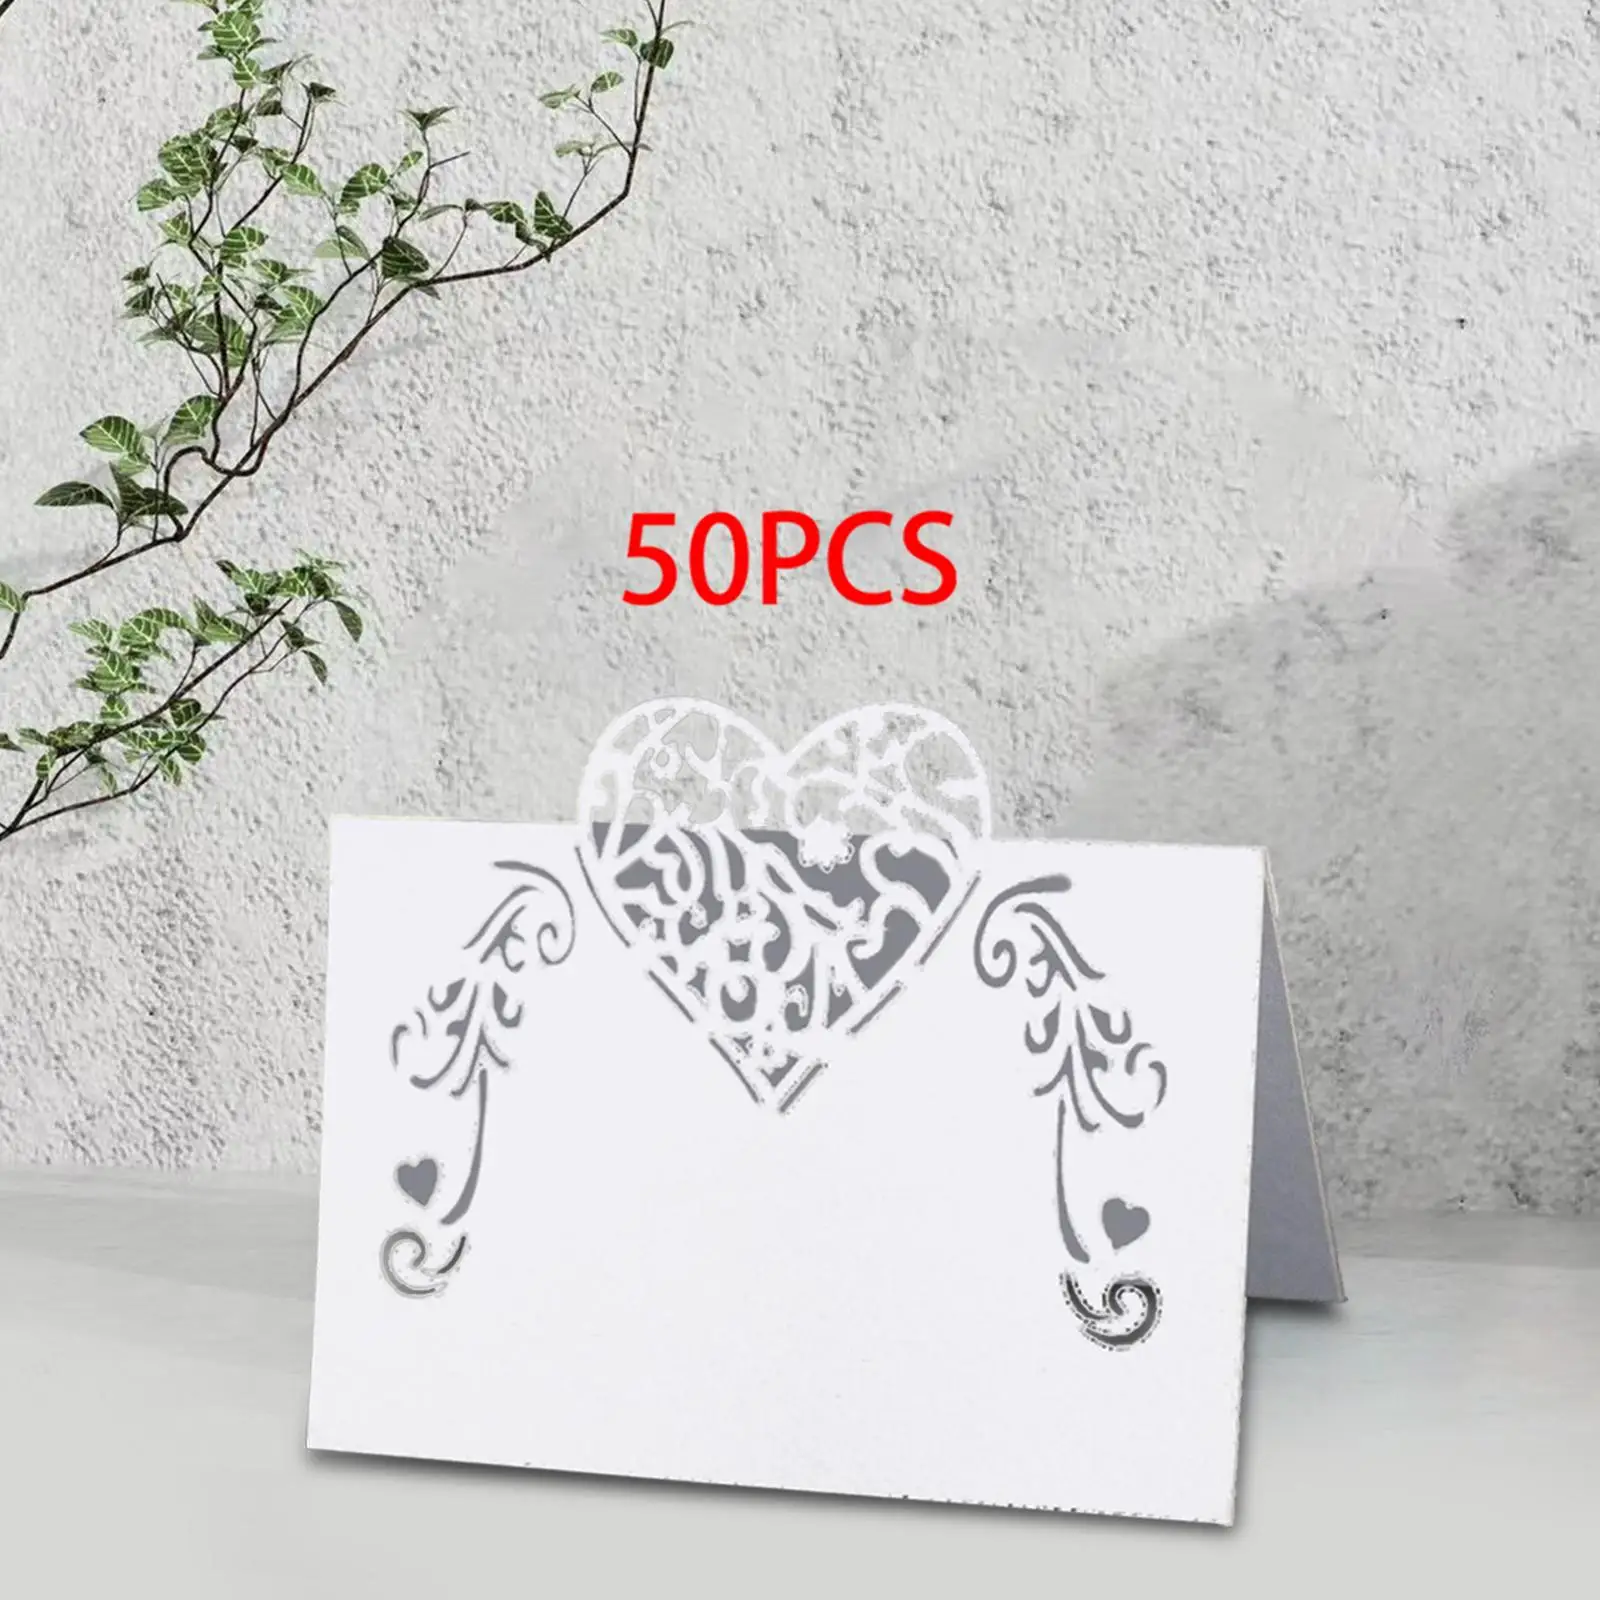 50x Heart Shape Wedding Place Cards Table Number for Parties Events Banquet